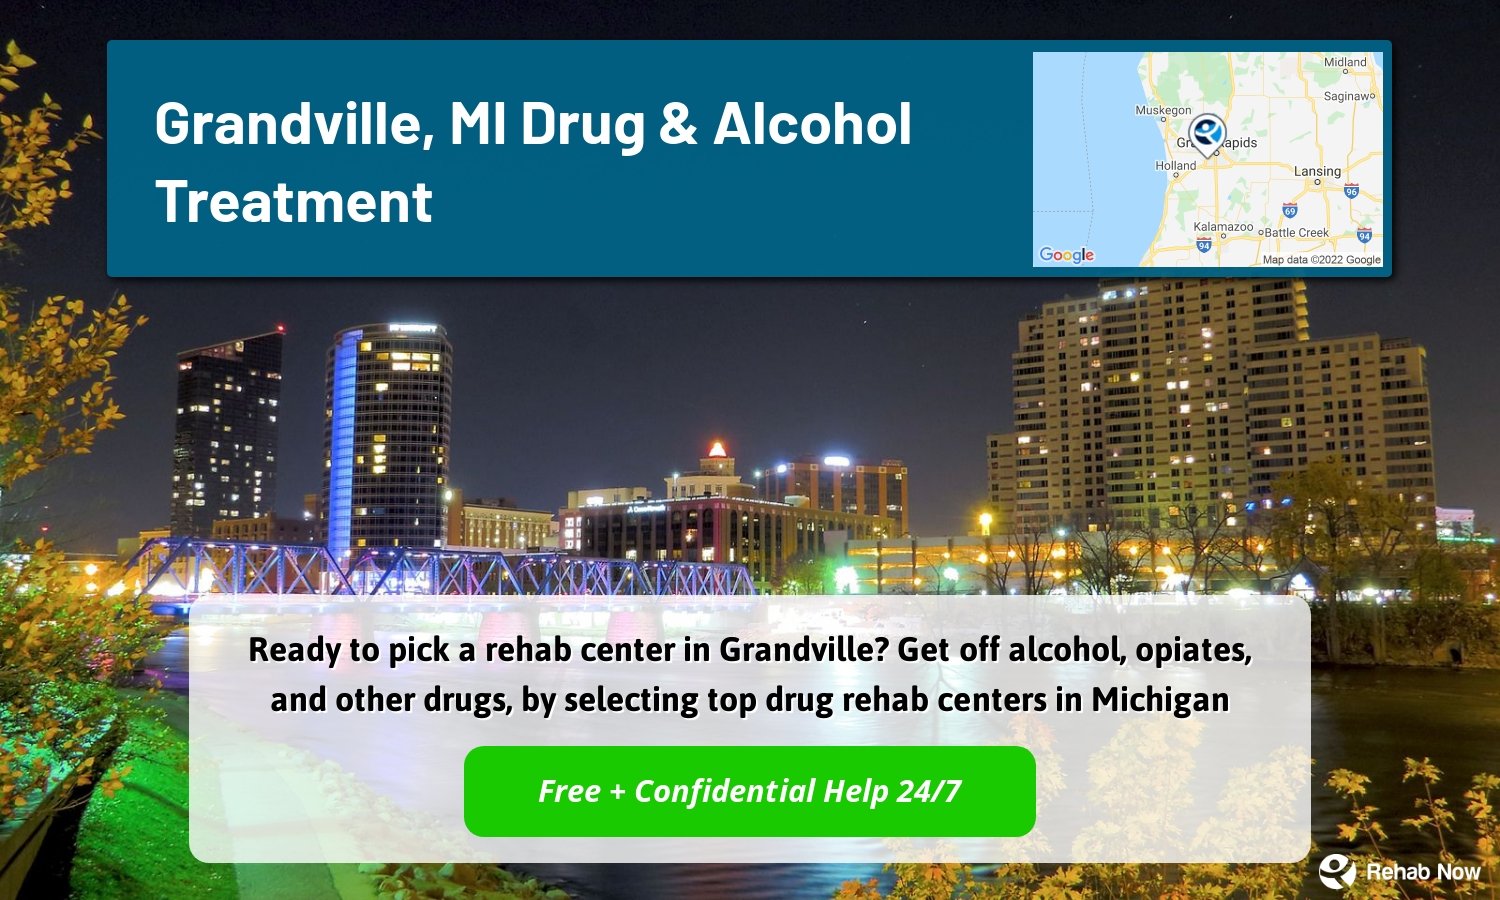 Ready to pick a rehab center in Grandville? Get off alcohol, opiates, and other drugs, by selecting top drug rehab centers in Michigan